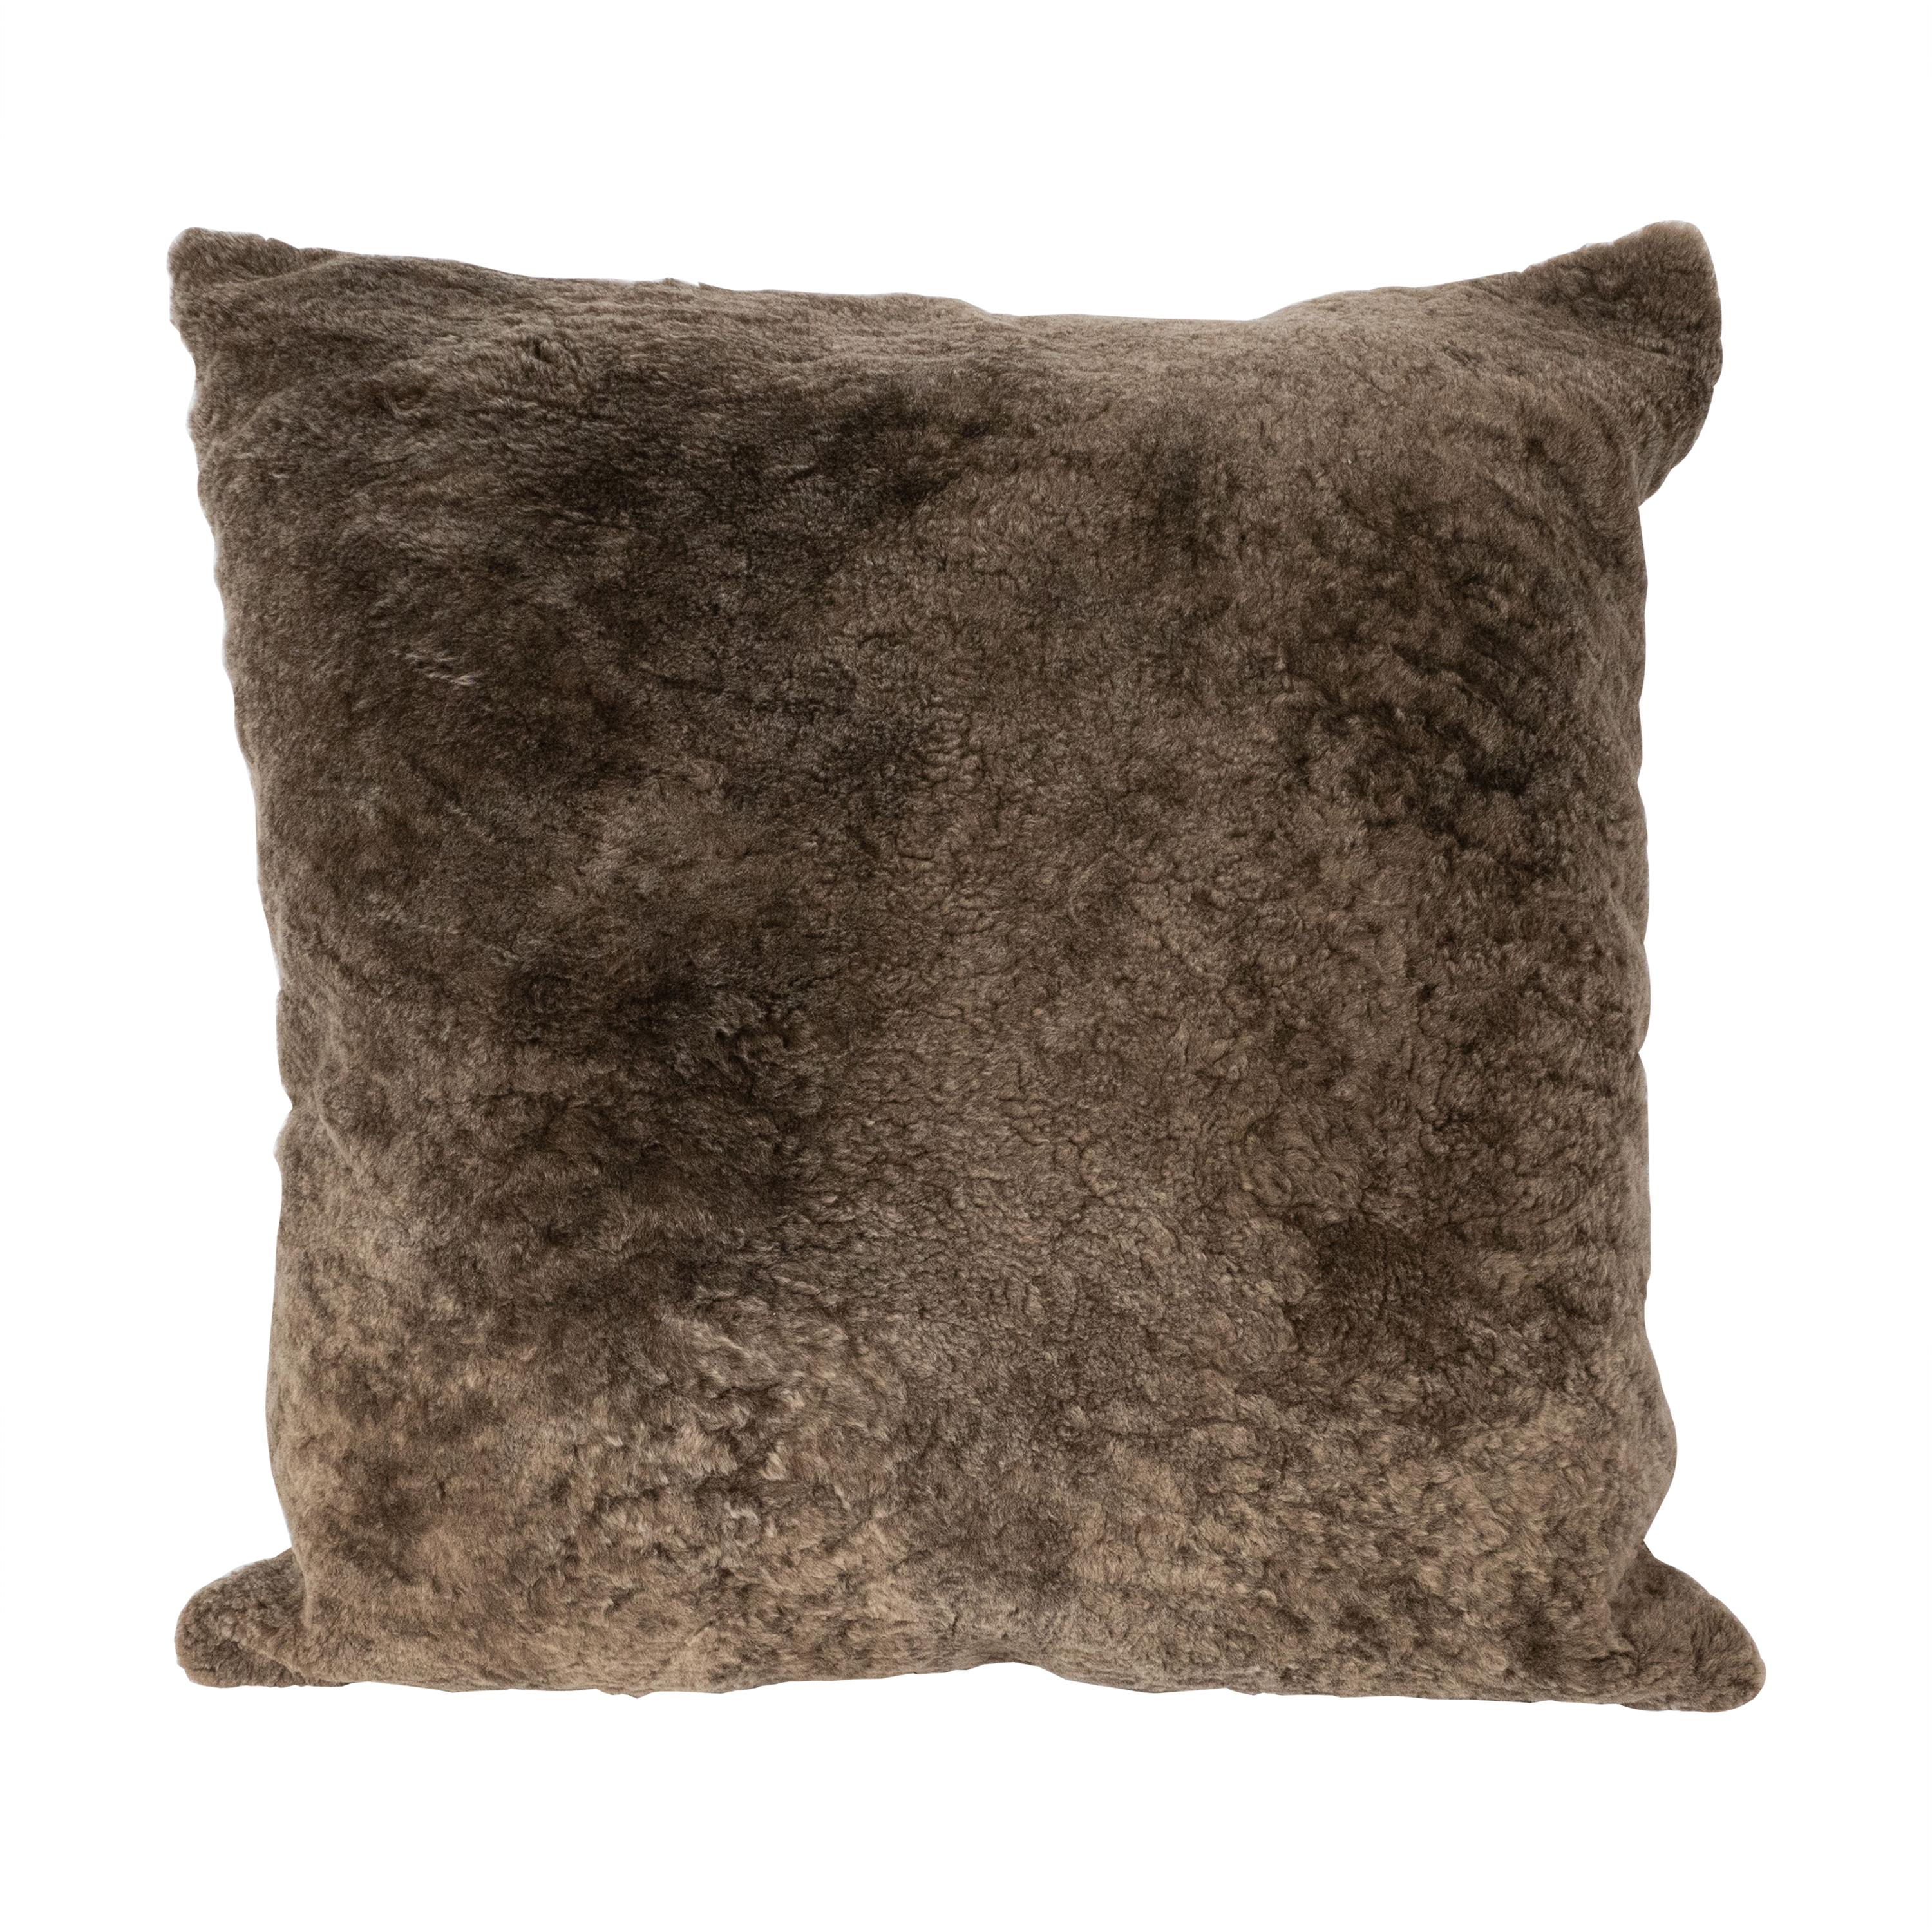 Modernist Slate Umber Square Pillow in Luxe Shearling and Suede